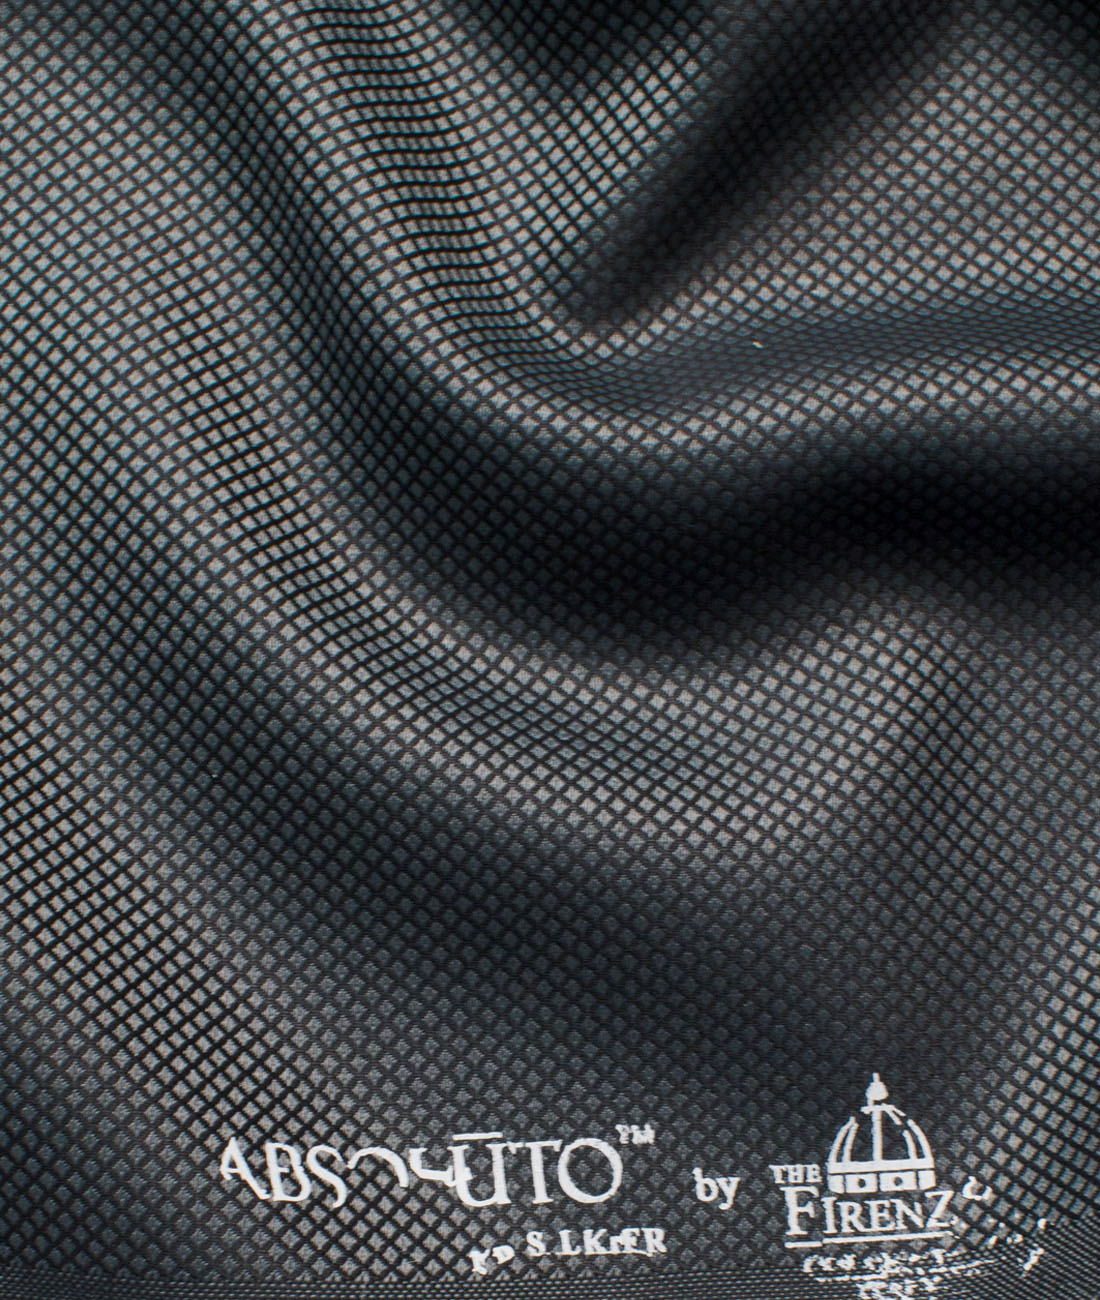 Absoluto Men's Terry Rayon Structured 3.75 Meter Unstitched Suiting Fabric (Grey)